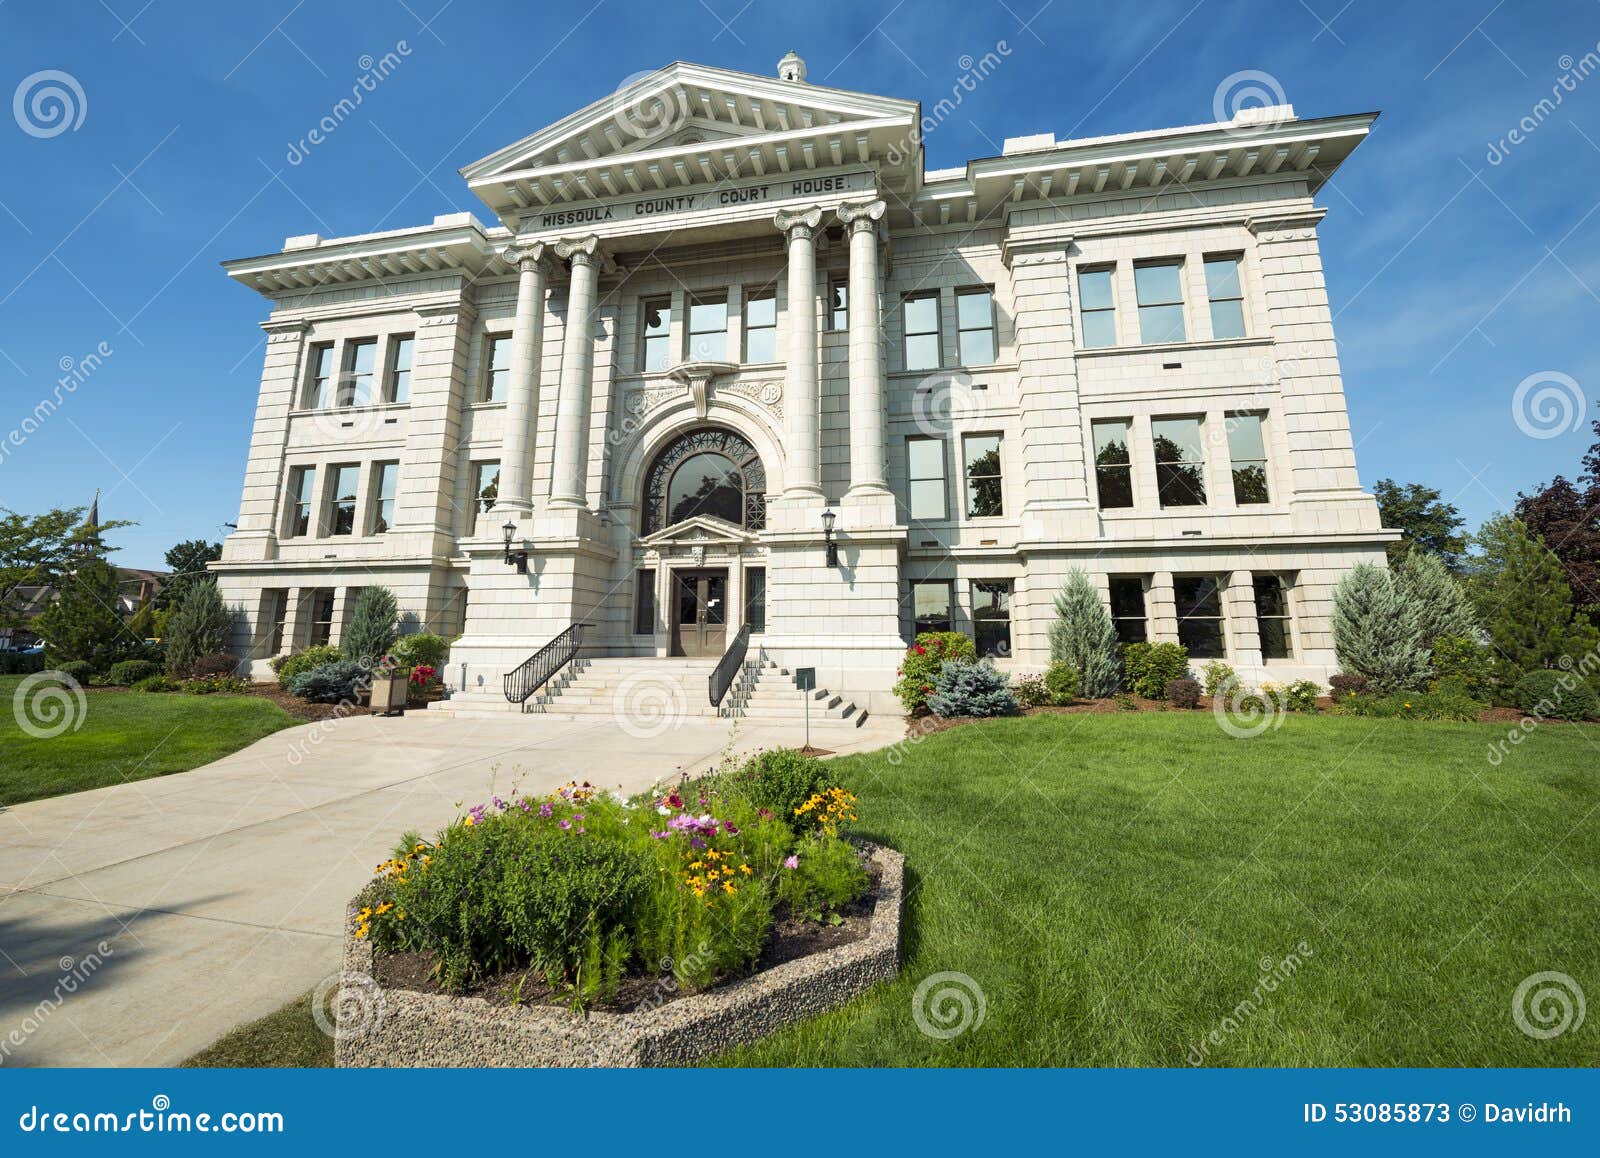 county courthouse in missoula, montana with flowers